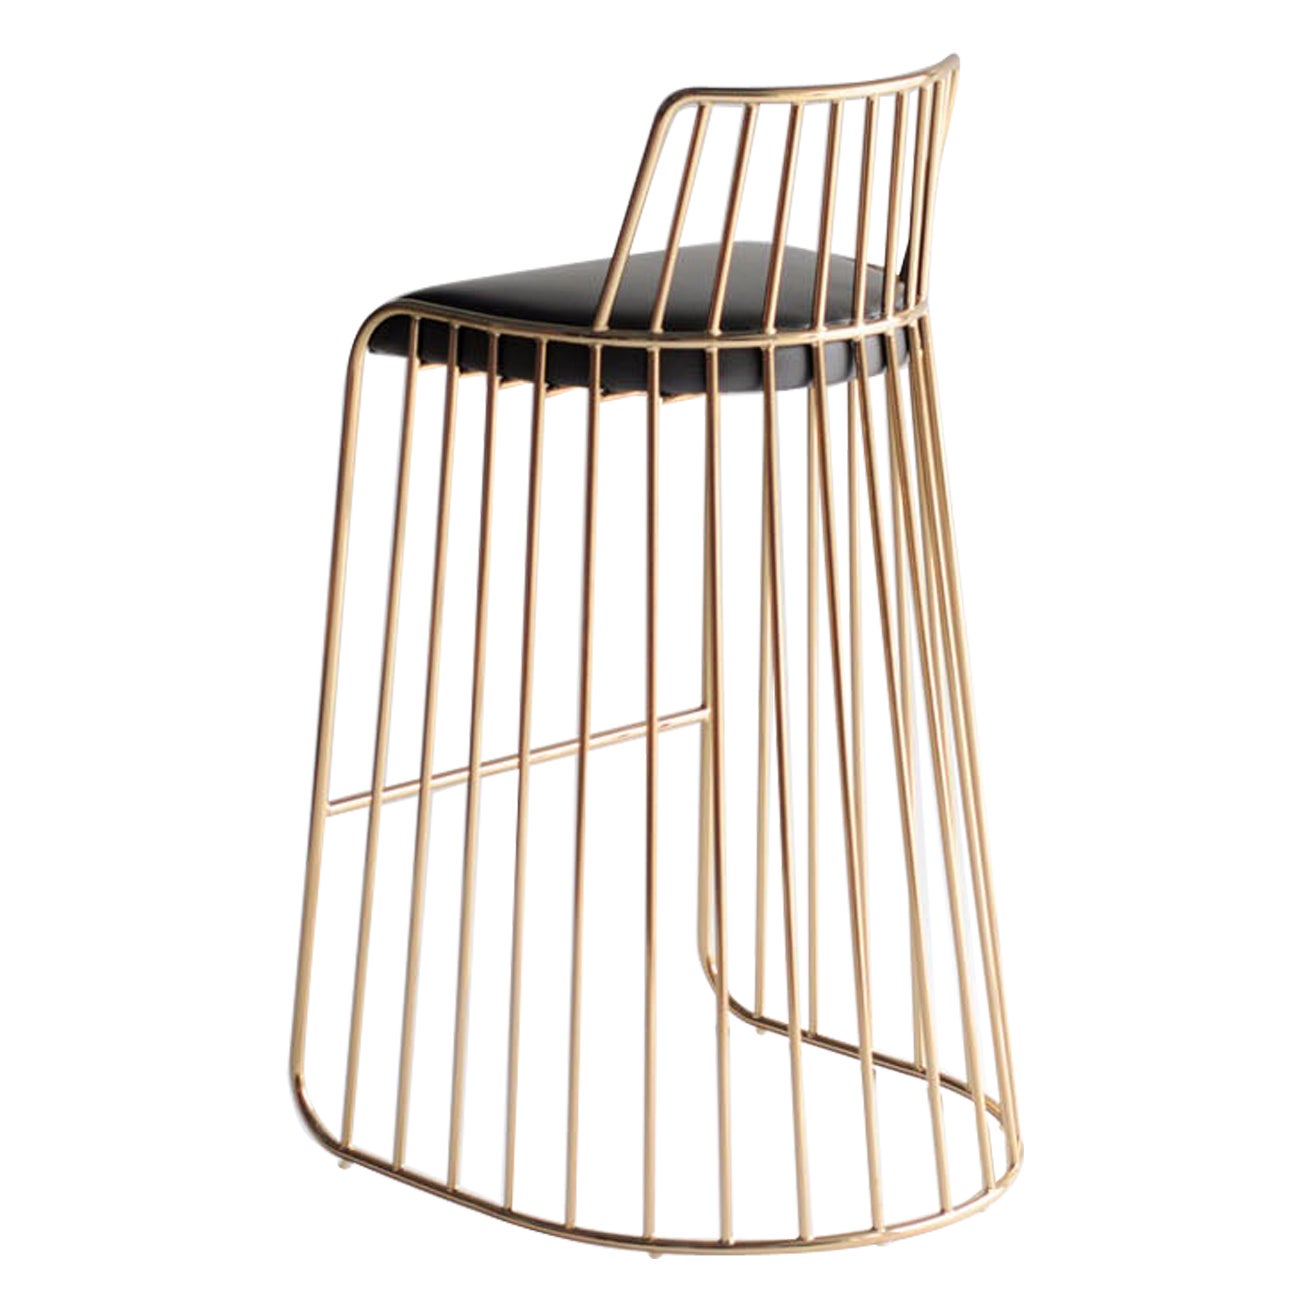 Bride's Veil Counter Stool with Back by Phase Design, Smoked Brass